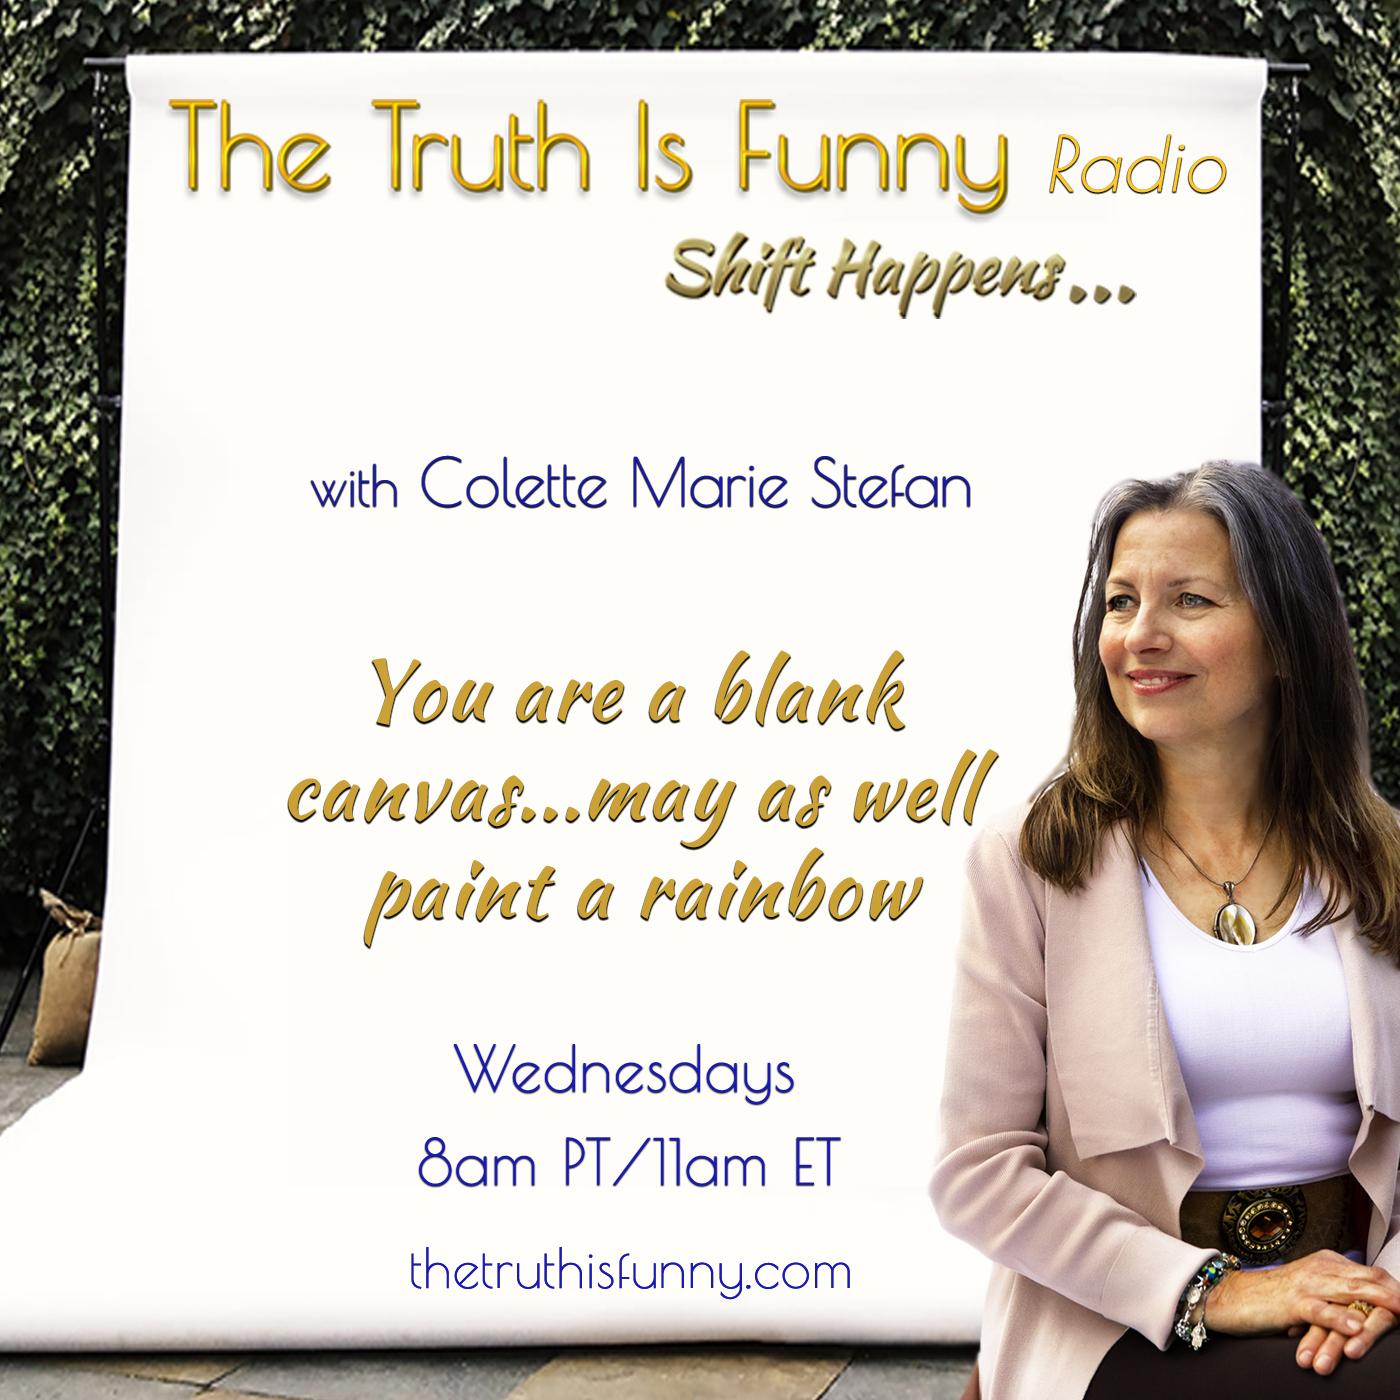 The Truth is Funny Radio ...shift happen! with Colette Marie Stefan